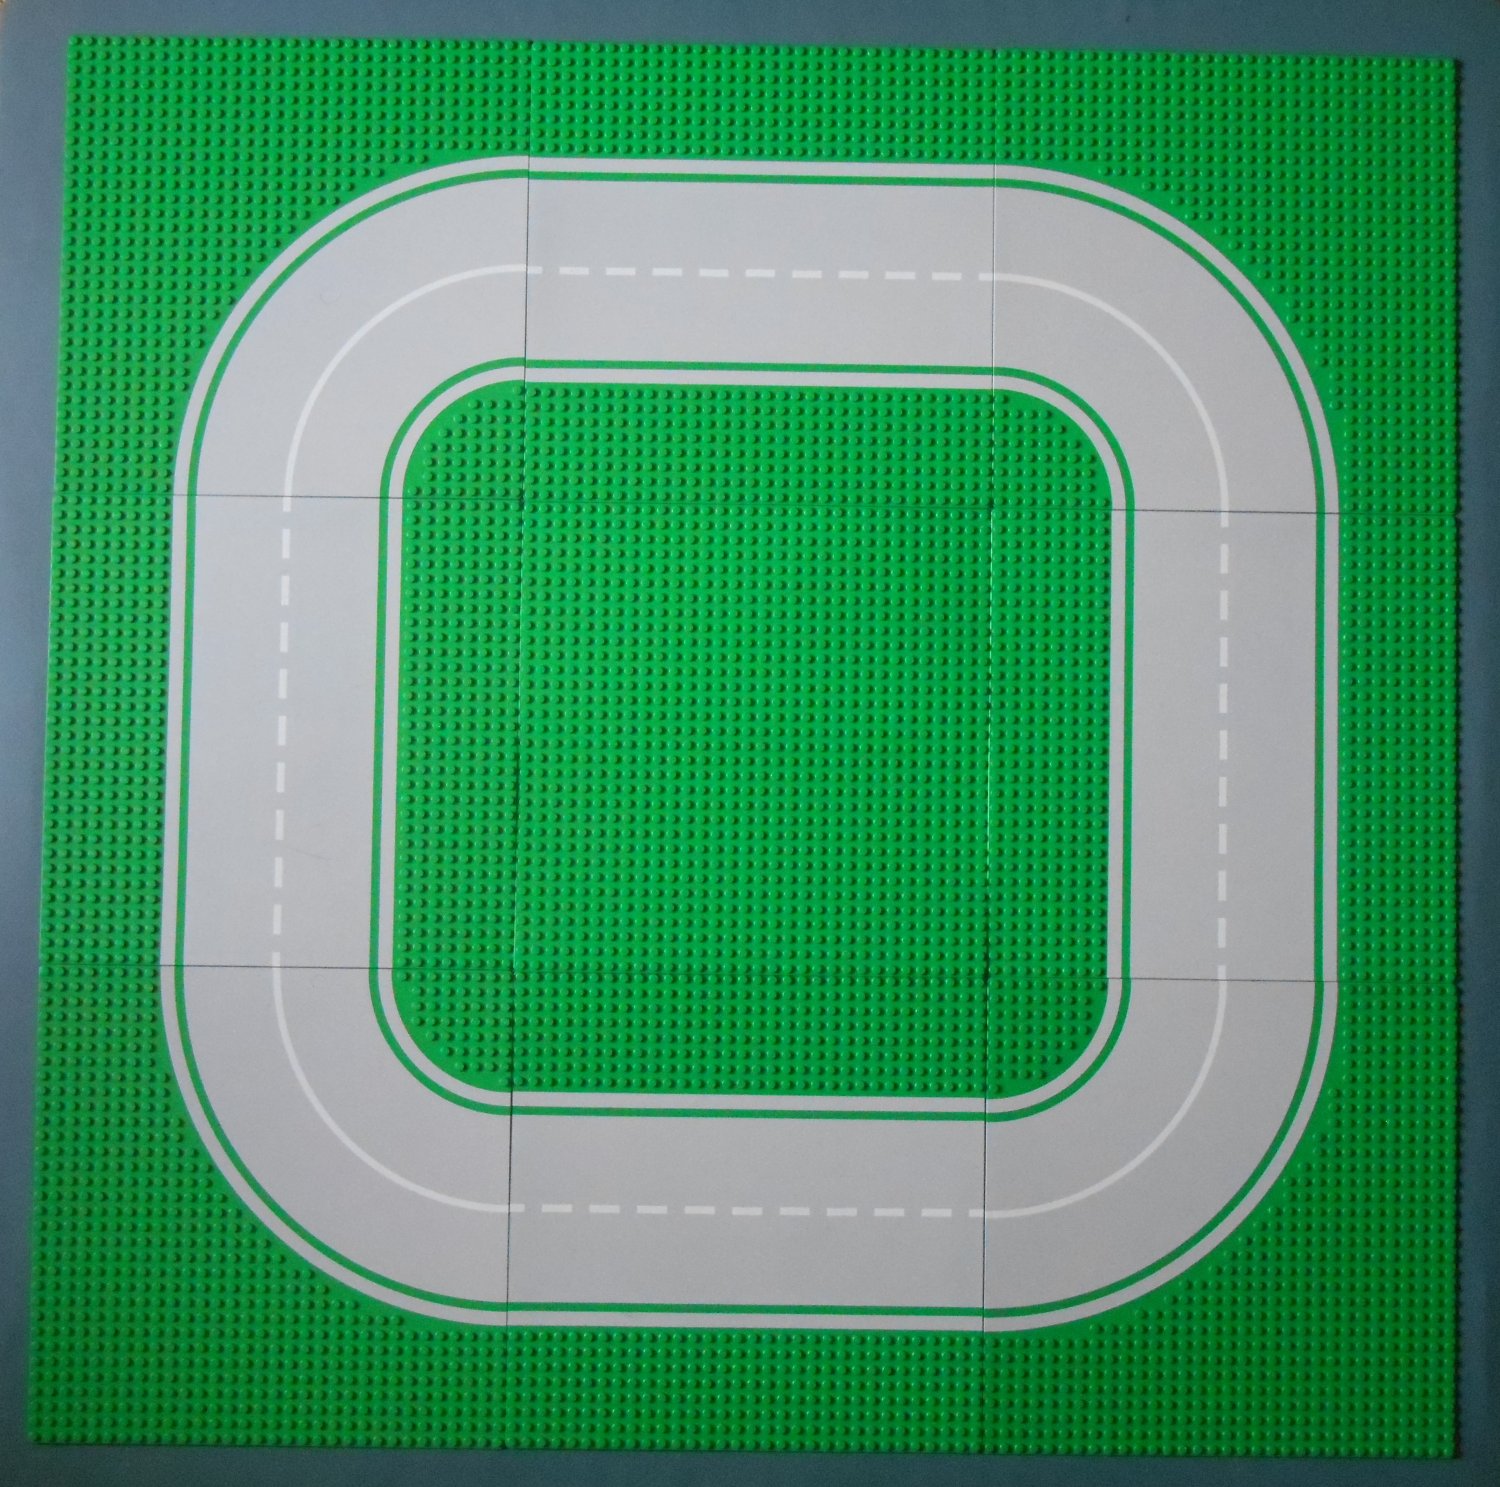 Lego 32 x 32 Stud Base Plates Baseplates 10" Square Lot of 10 Green Straight Curved Roadway Road